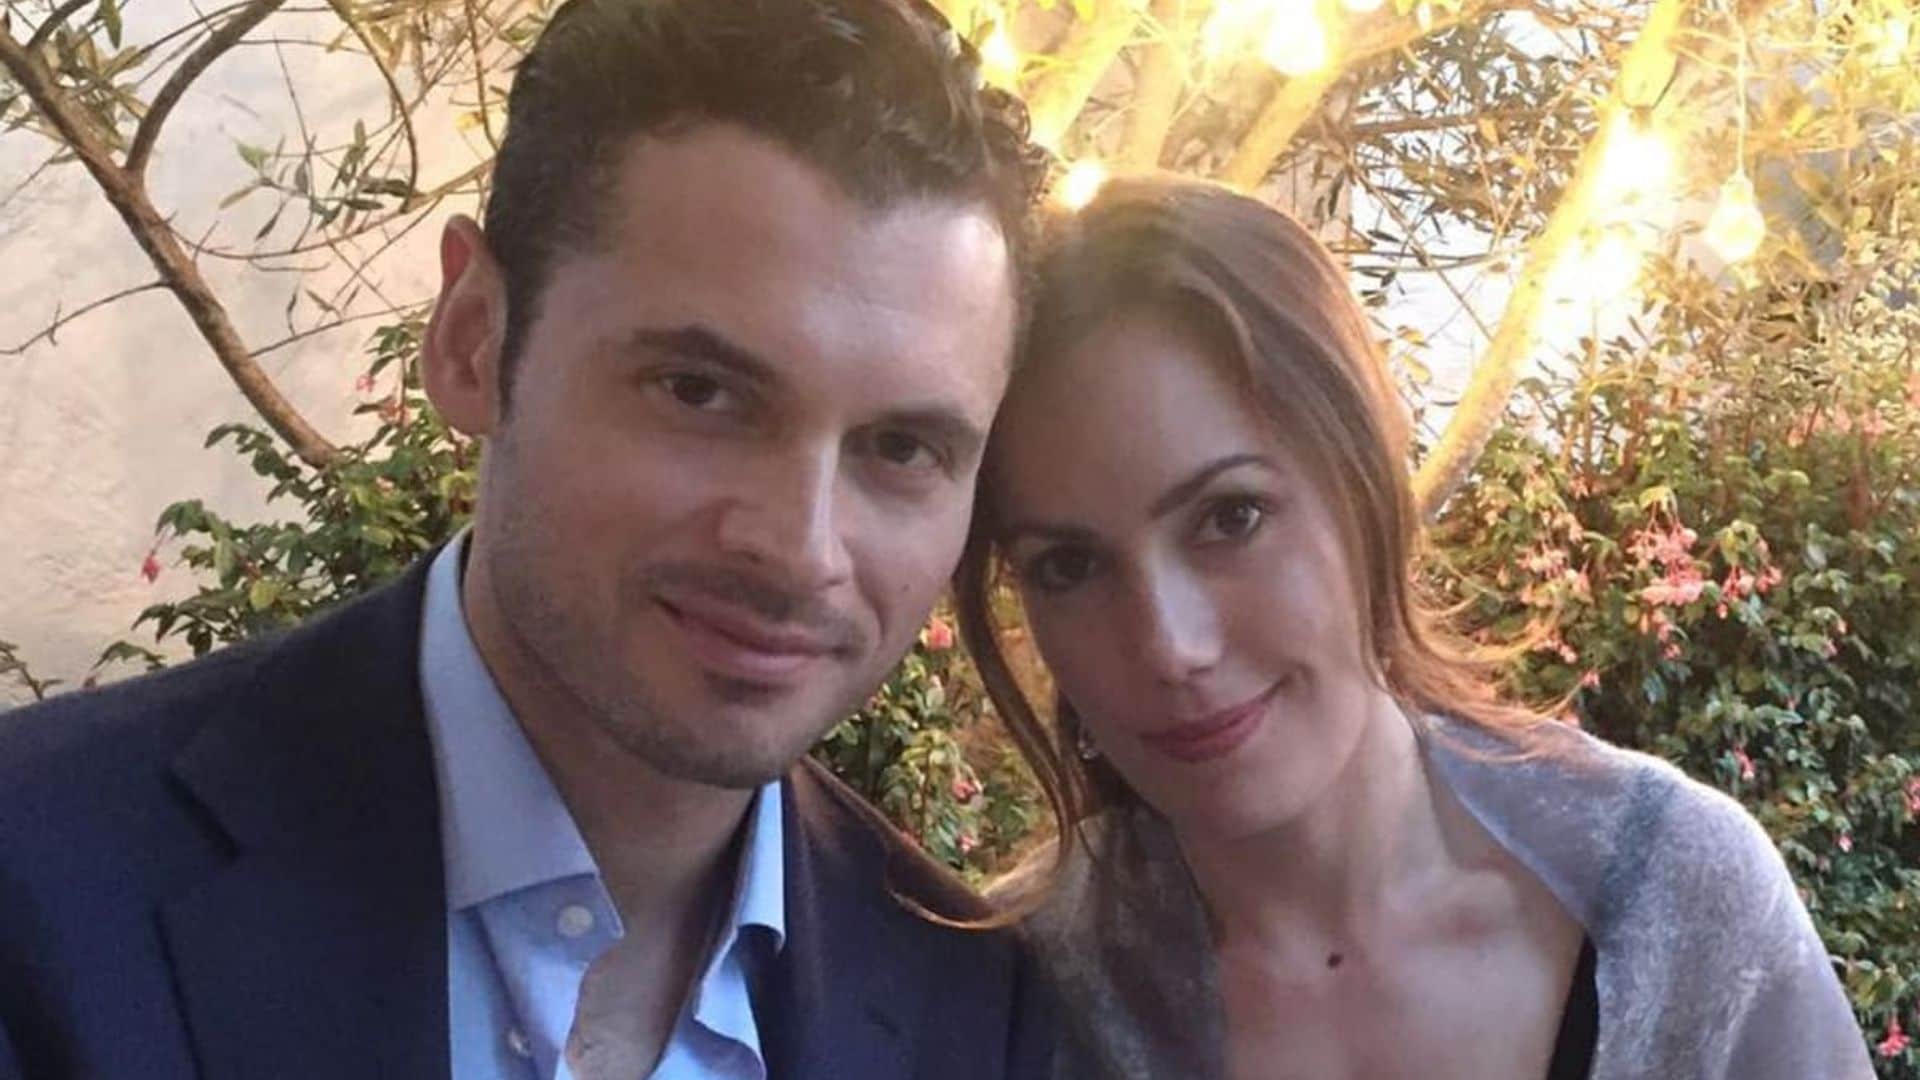 Adan Canto’s wife shares emotional tribute after his death: ‘Forever my treasure’